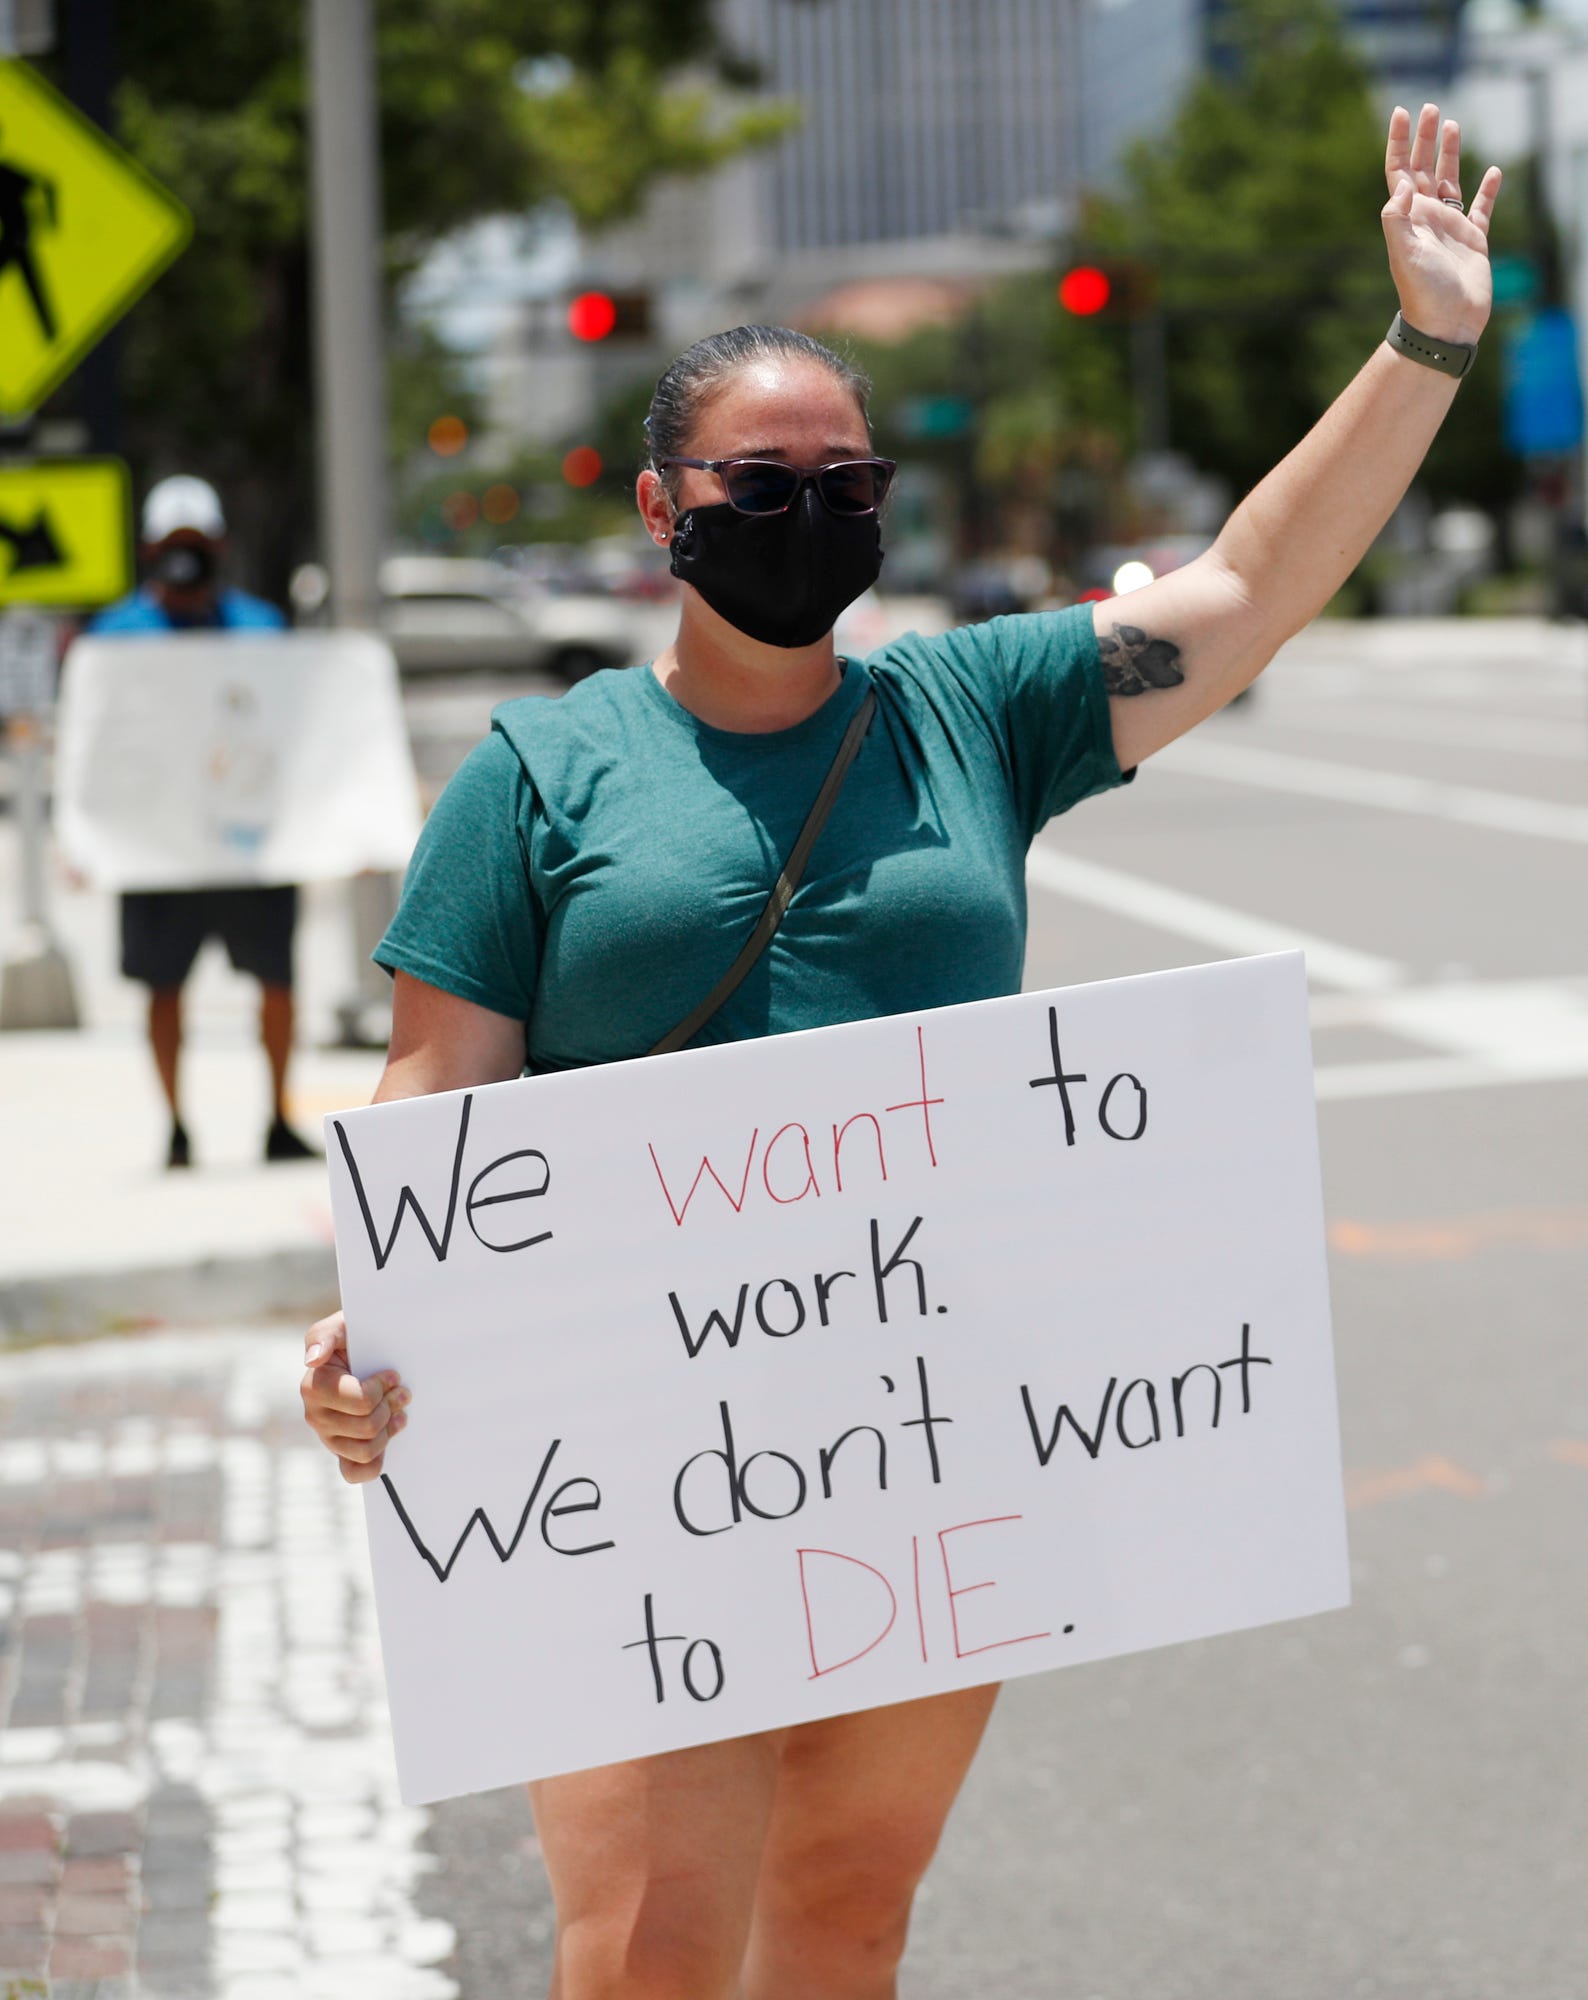 TAMPA, FL - JULY 16: Middle school teacher Danielle Weigand stands in protest in front of the Hillsborough County Schools District Office on July 16, 2020 in Tampa, Florida. Teachers and administrators from Hillsborough County Schools rallied against the reopening of schools due to health and safety concerns amid the COVID-19 pandemic. (Photo by Octavio Jones/Getty Images)